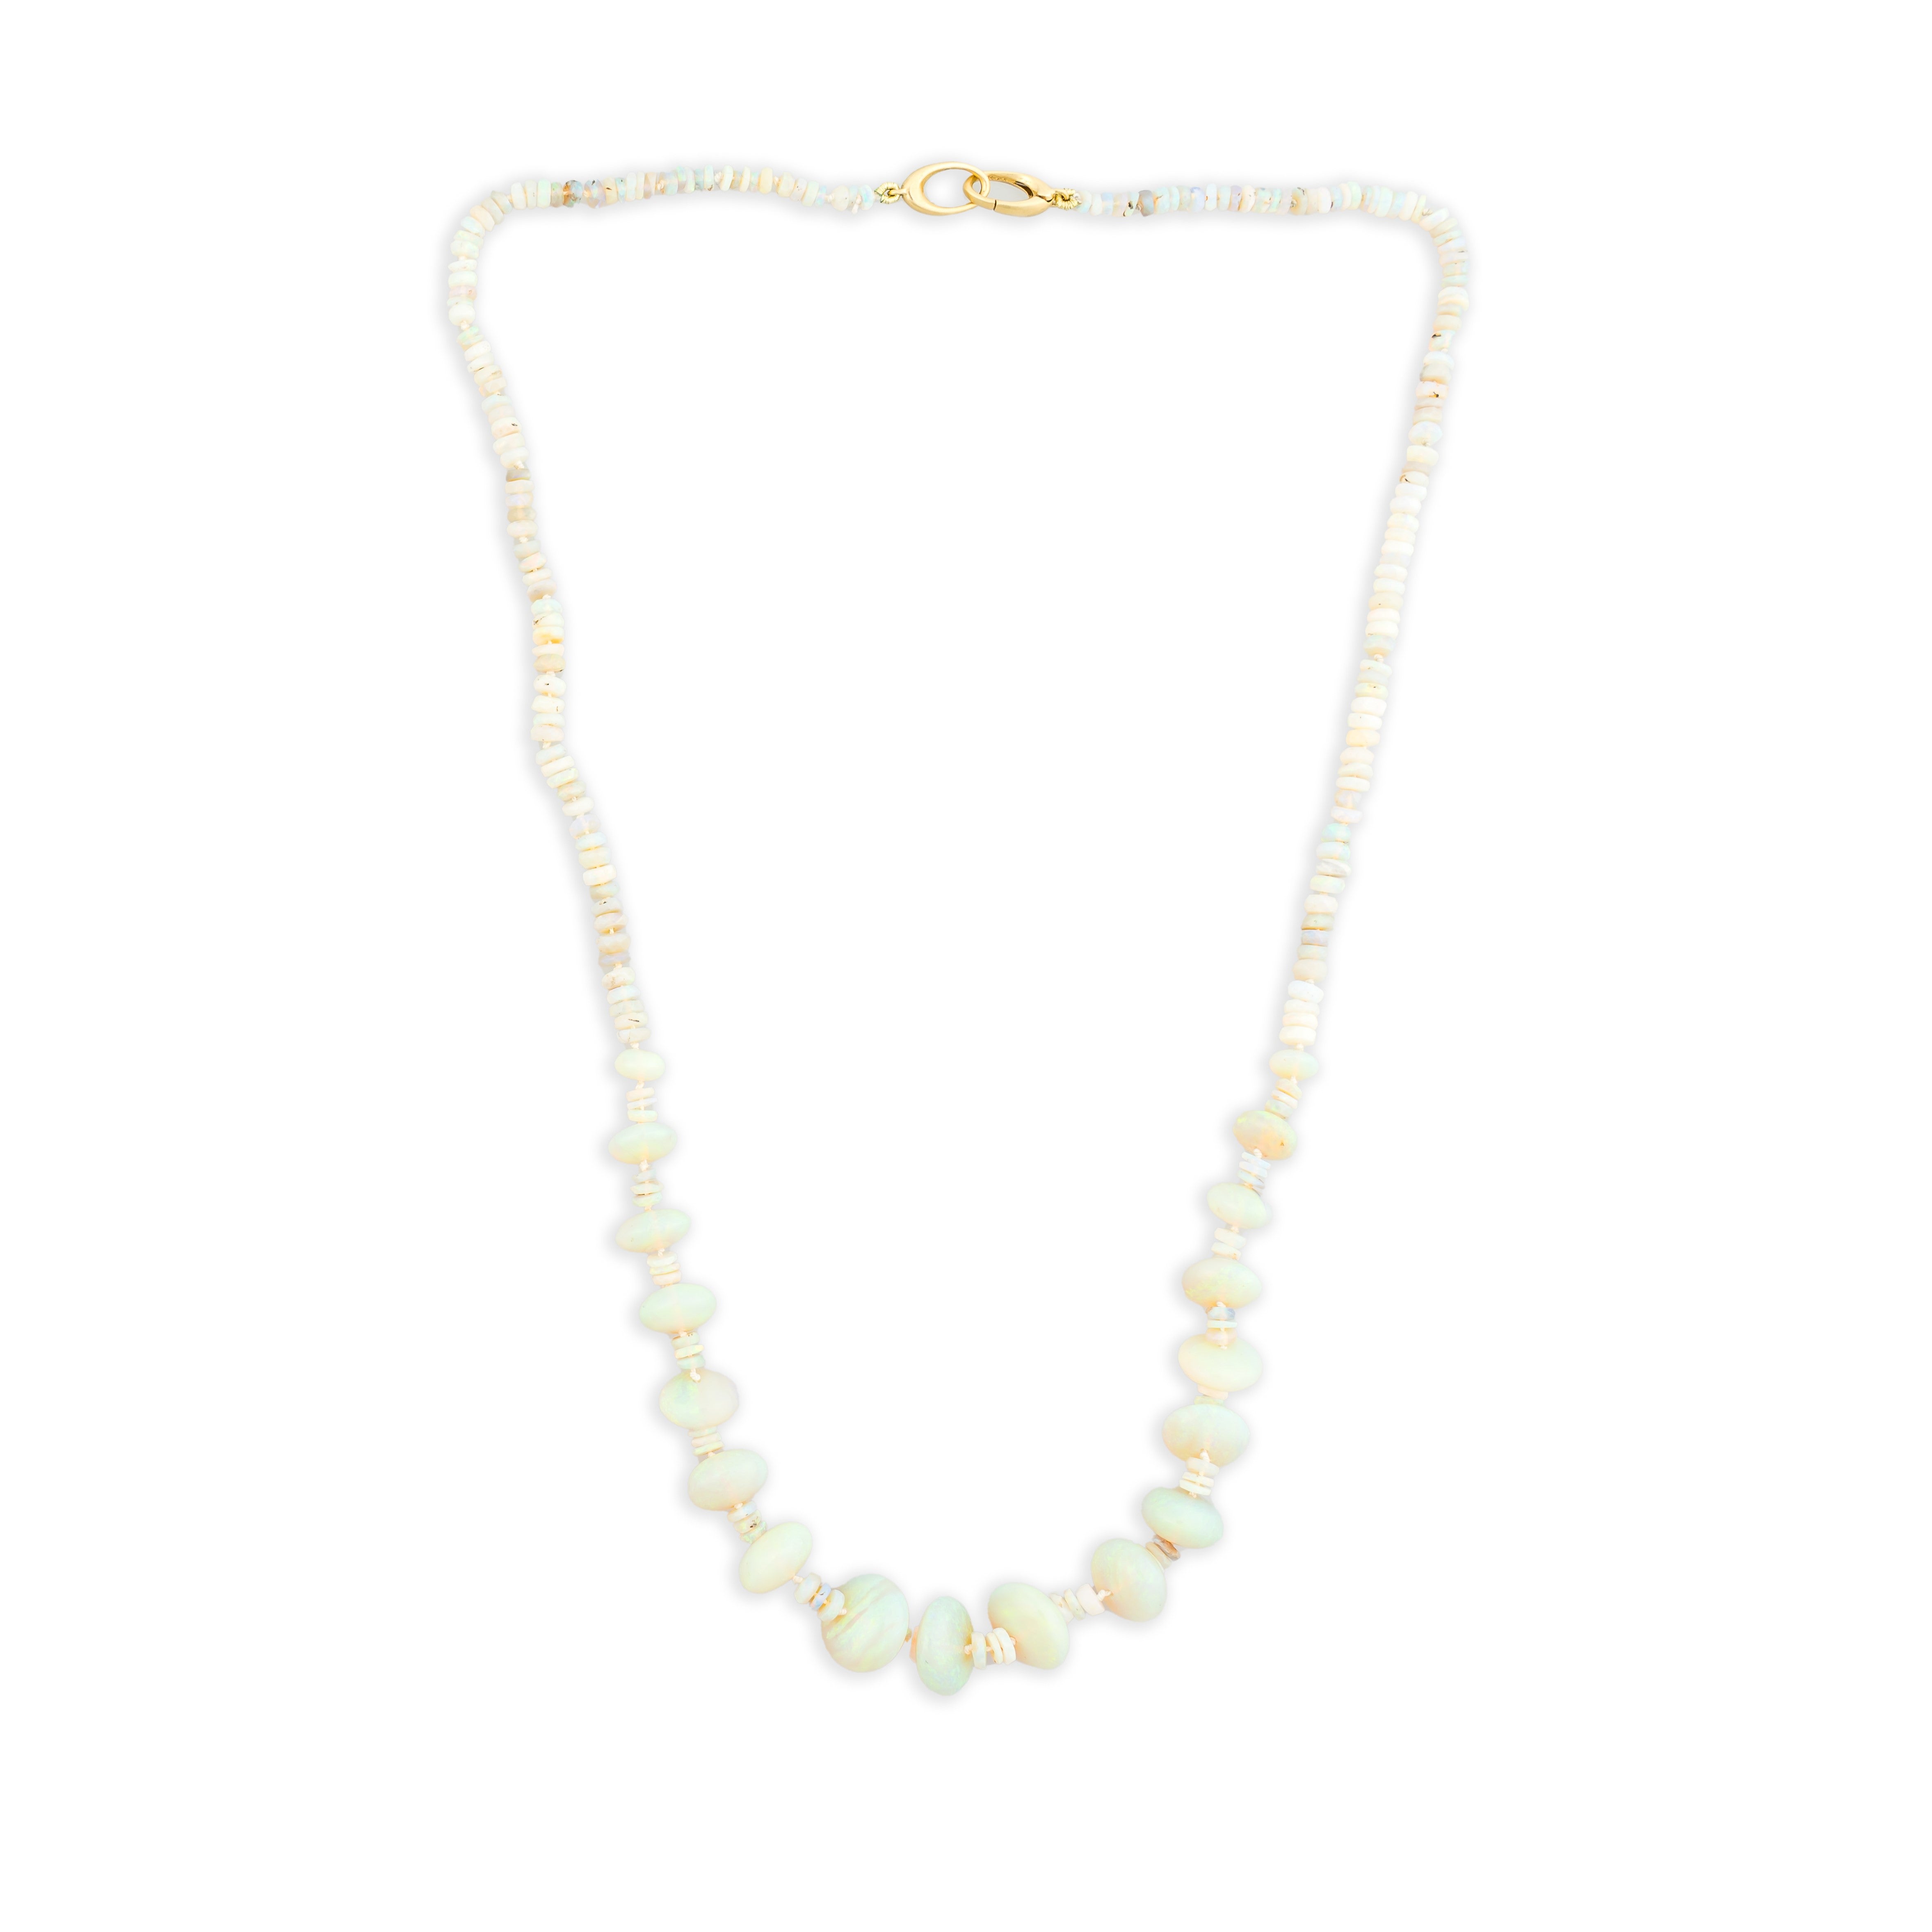 Teal Australian Opal Candy Necklace